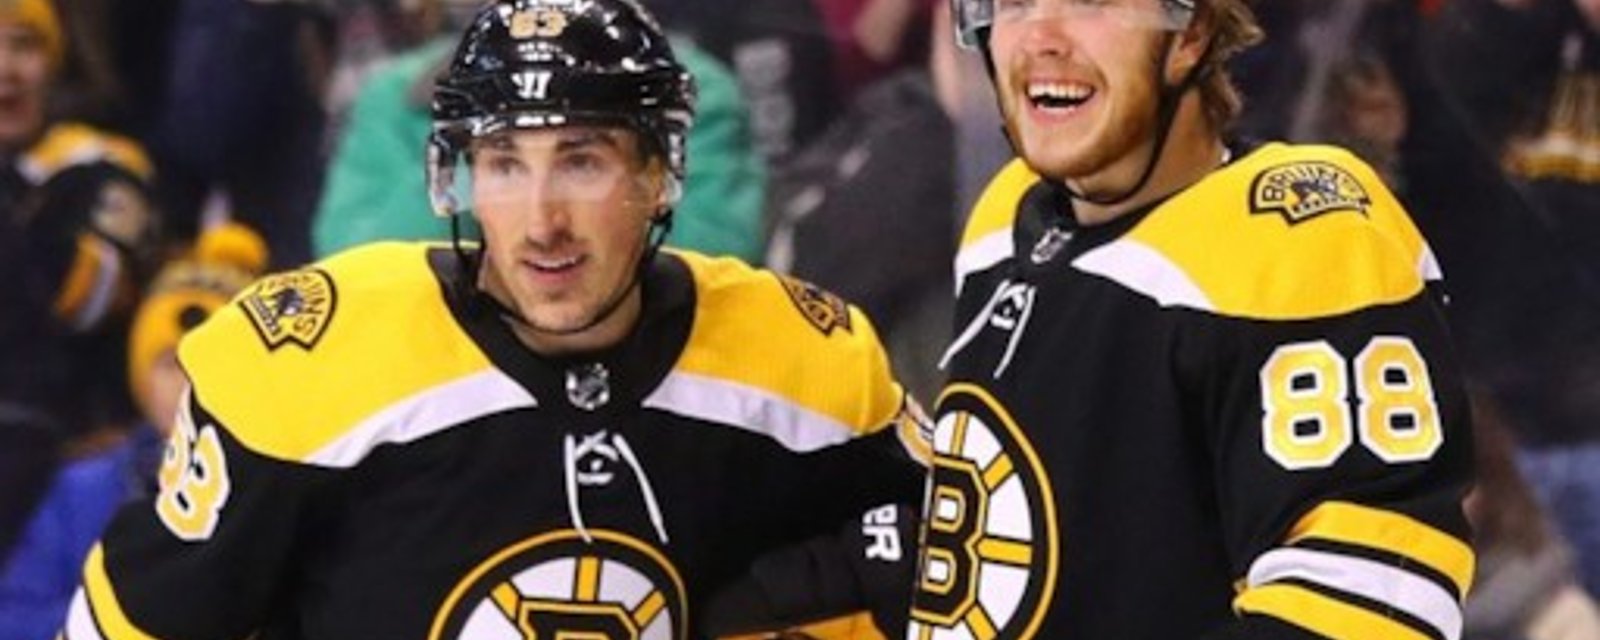 Pastrnak takes a big shot at teammate Marchand in Twitter battle gone wrong…